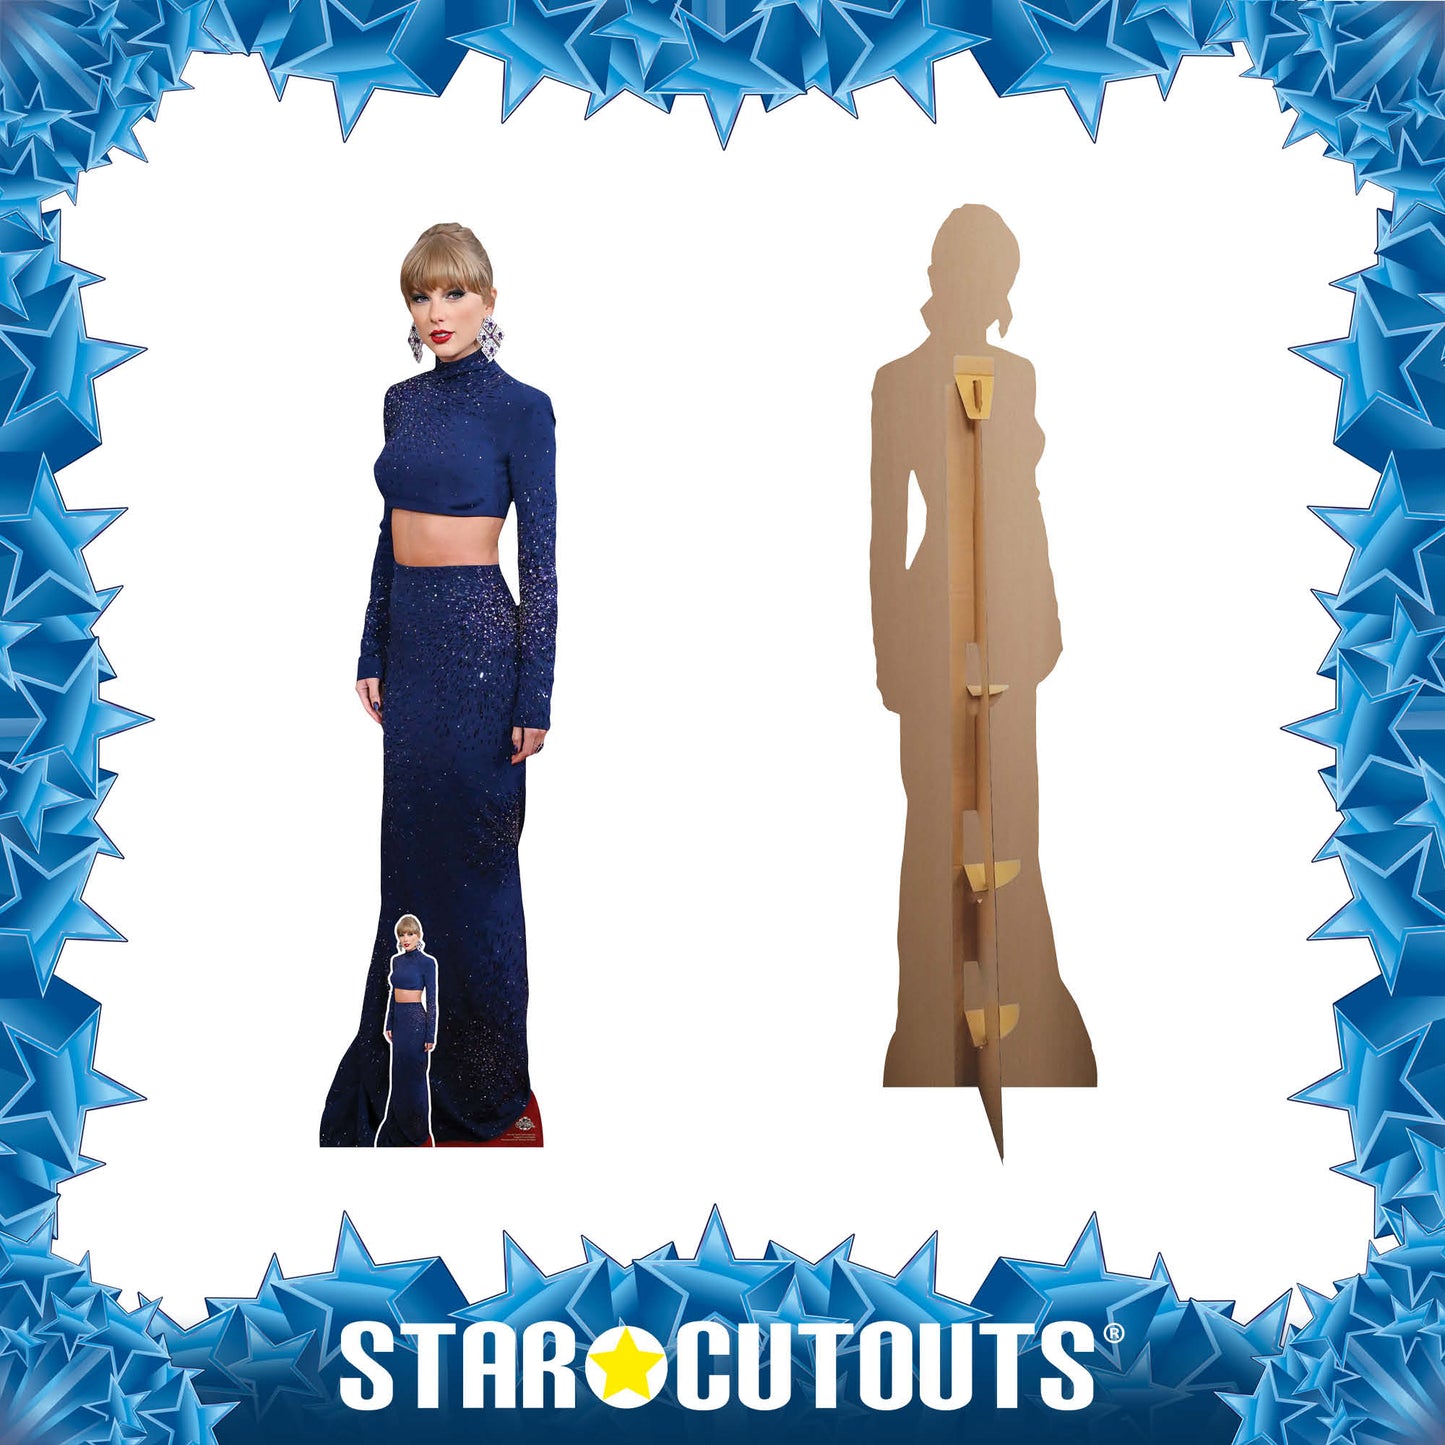 CS1166 Taylor Swift Crop Top Height 186cm Lifesize Cardboard Cut Out With Mini